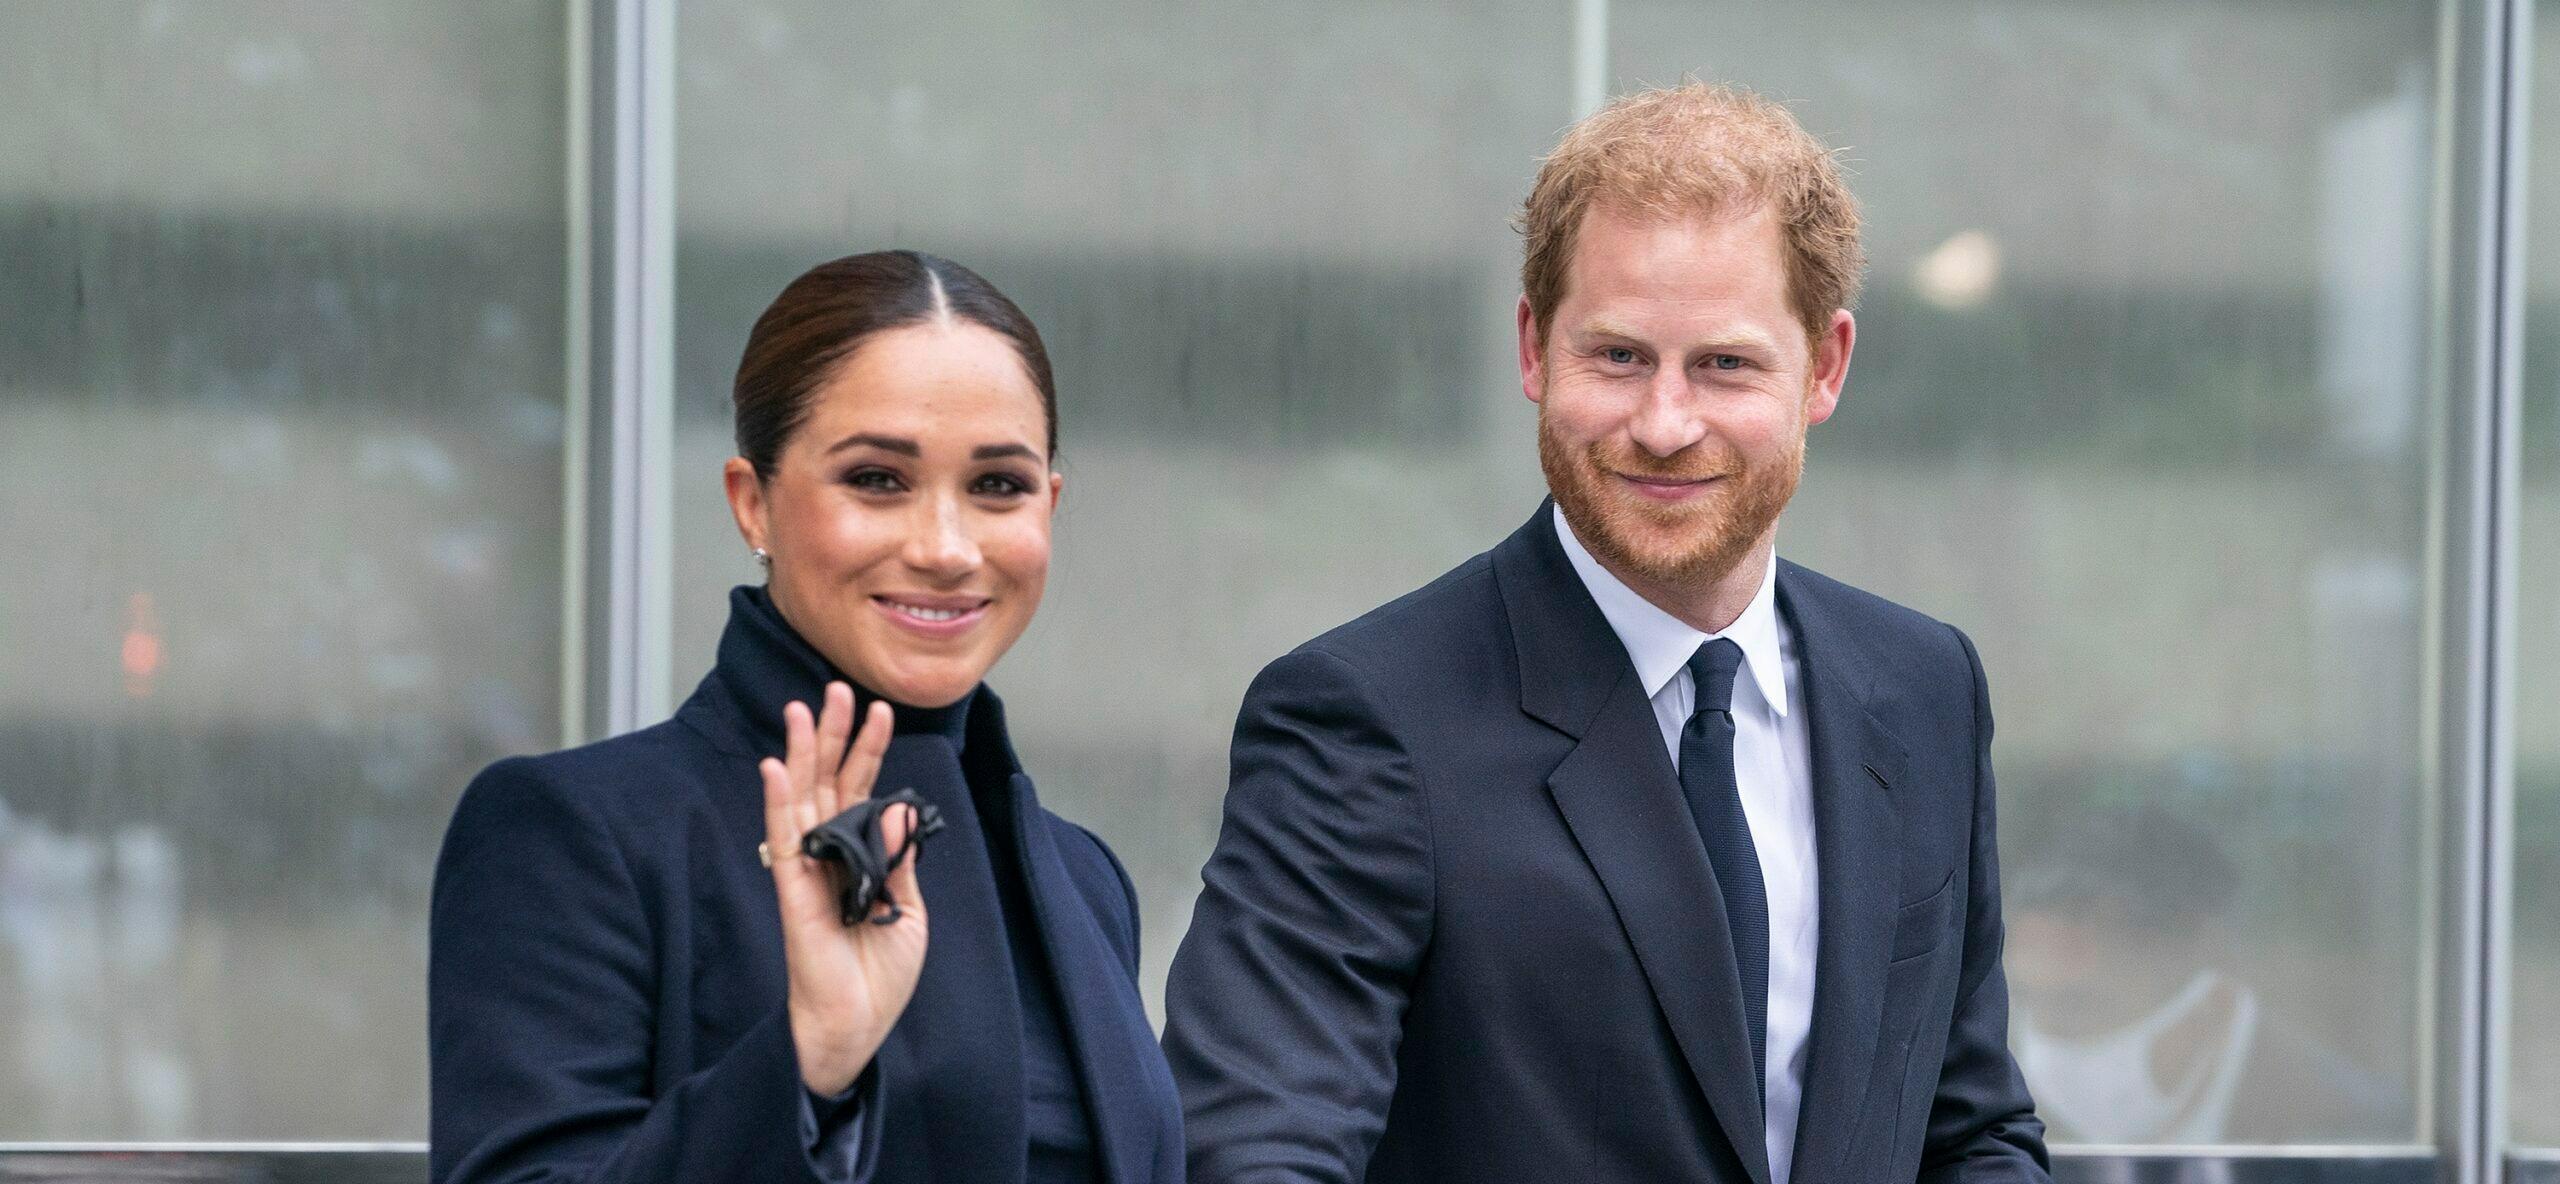 Meghan Markle & Harry Allegedly Pay $3.8 Million For Film Rights To Romance Novel For Netflix